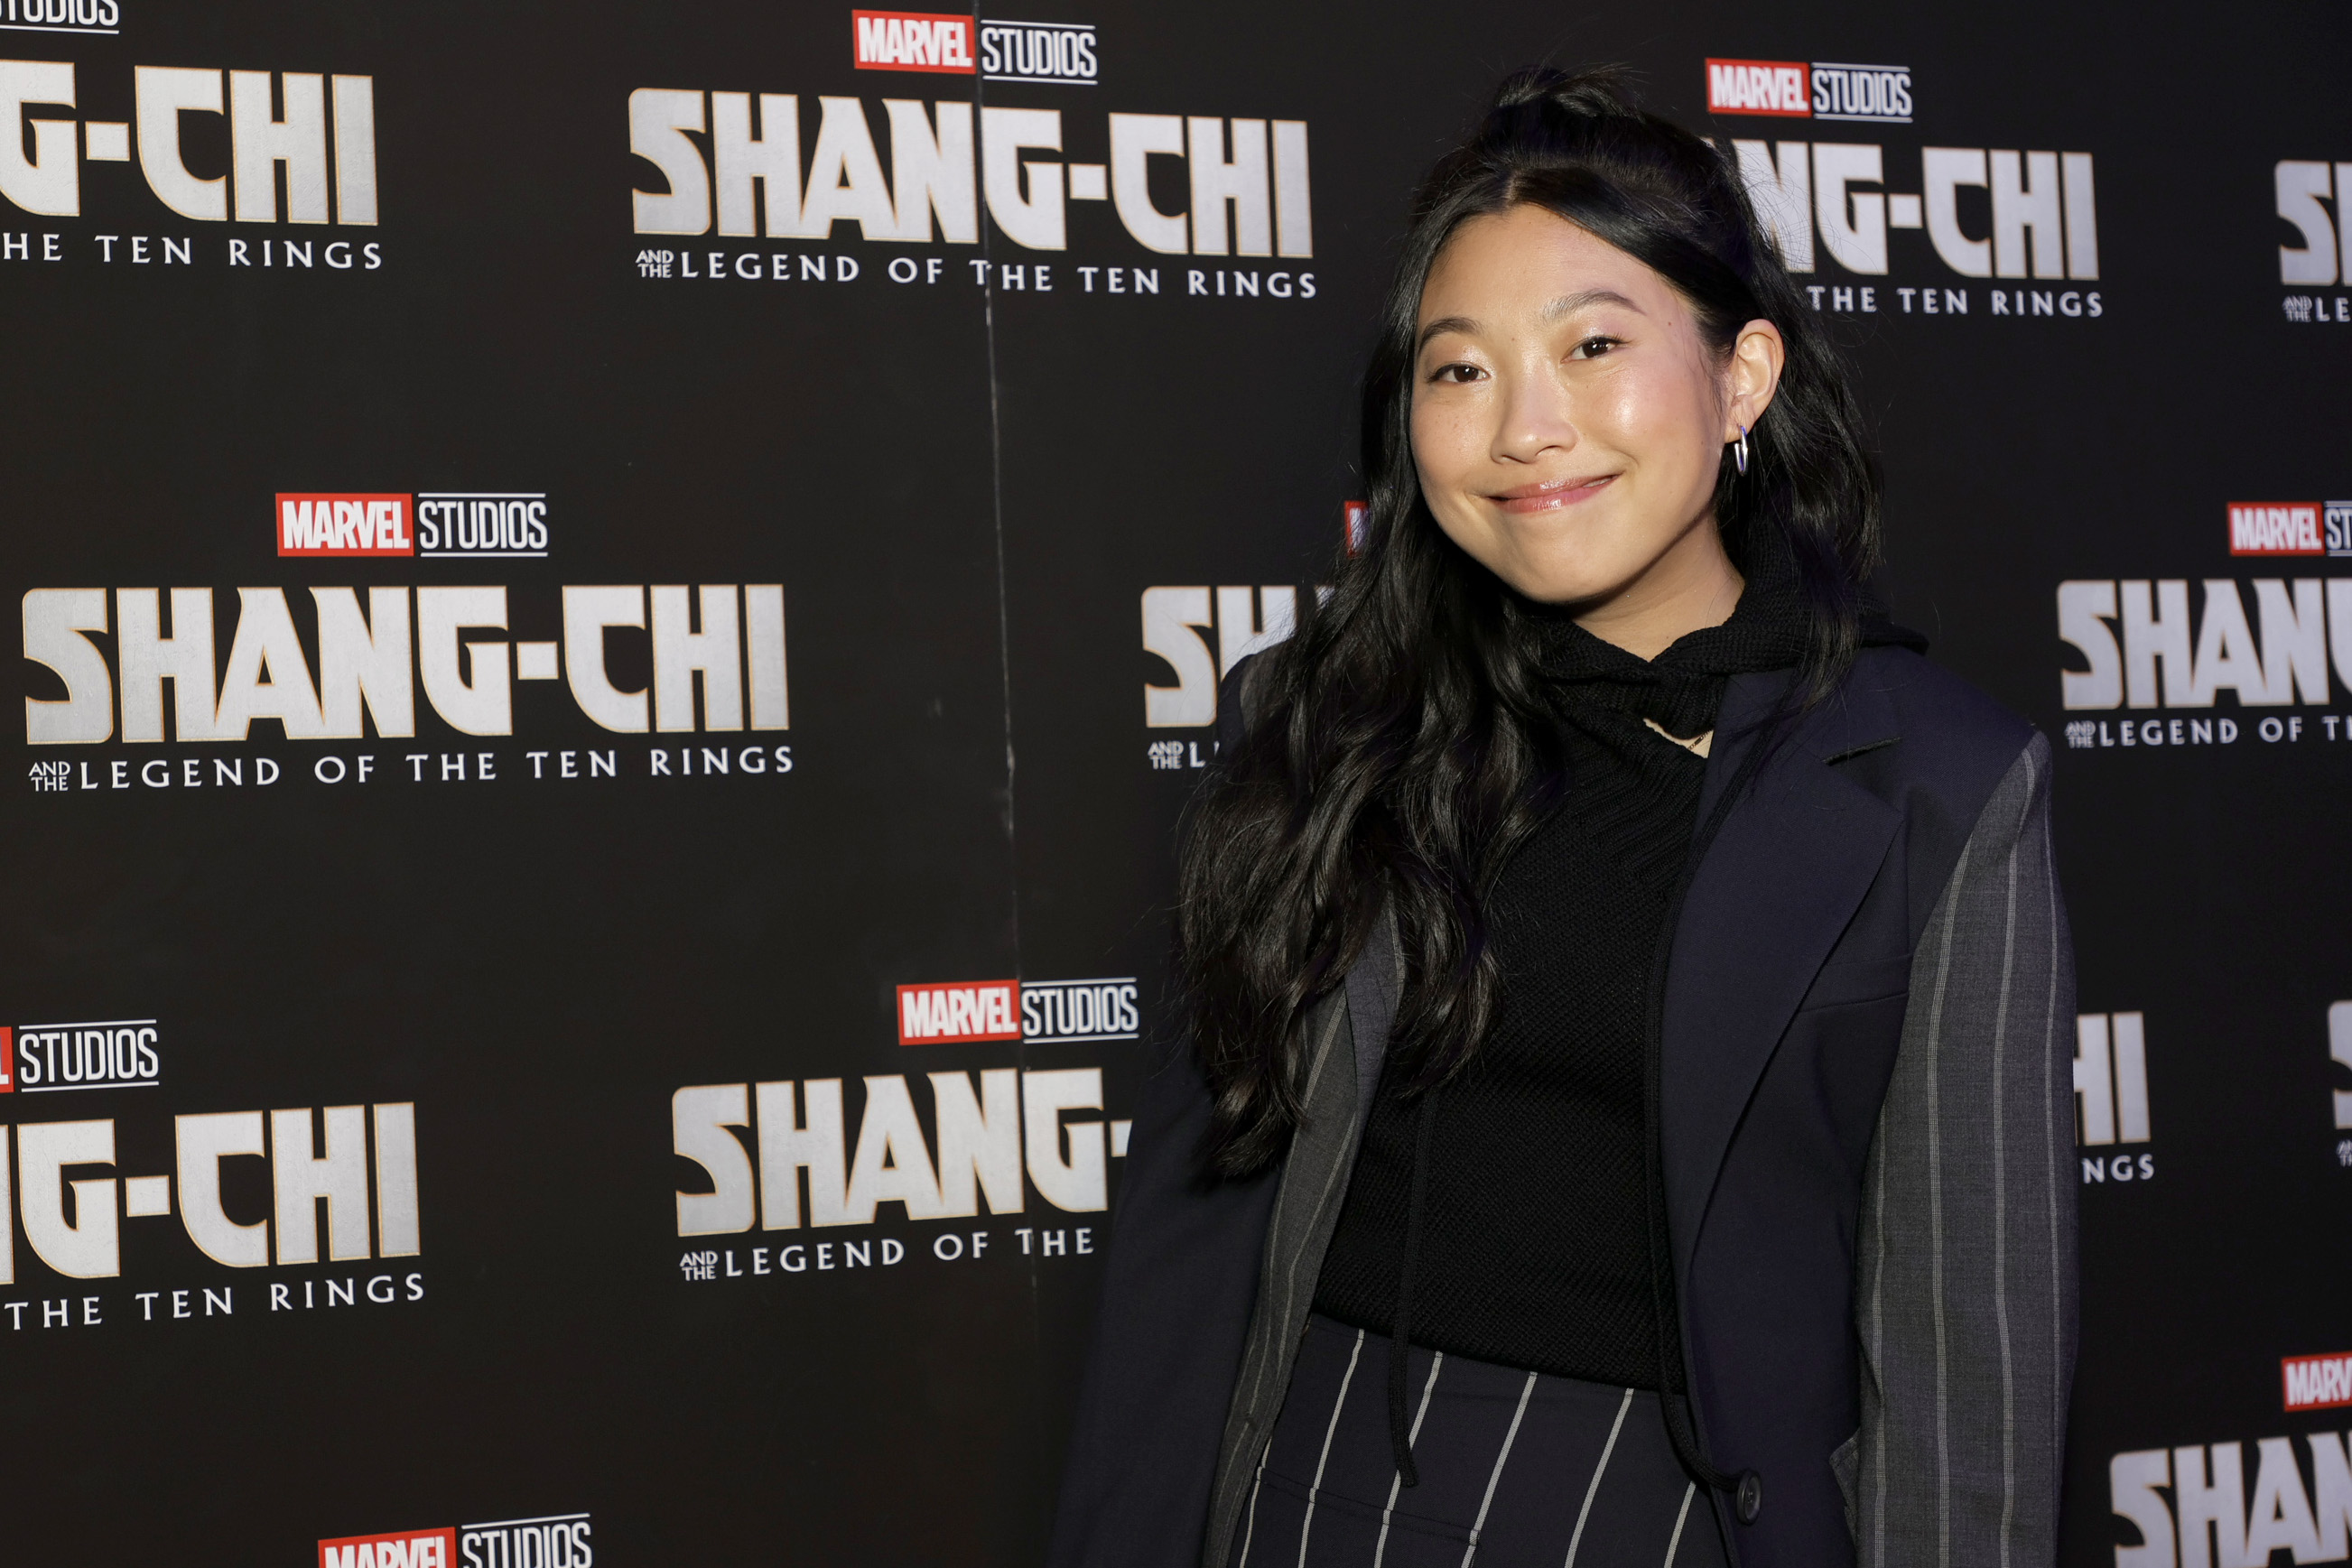 Awkwafina attends the Gold House special screening of Marvel Studios' "Shang-Chi and the Legend of the Ten Rings" at Regal Union Square on August 30, 2021, in New York City. | Source: Getty Images